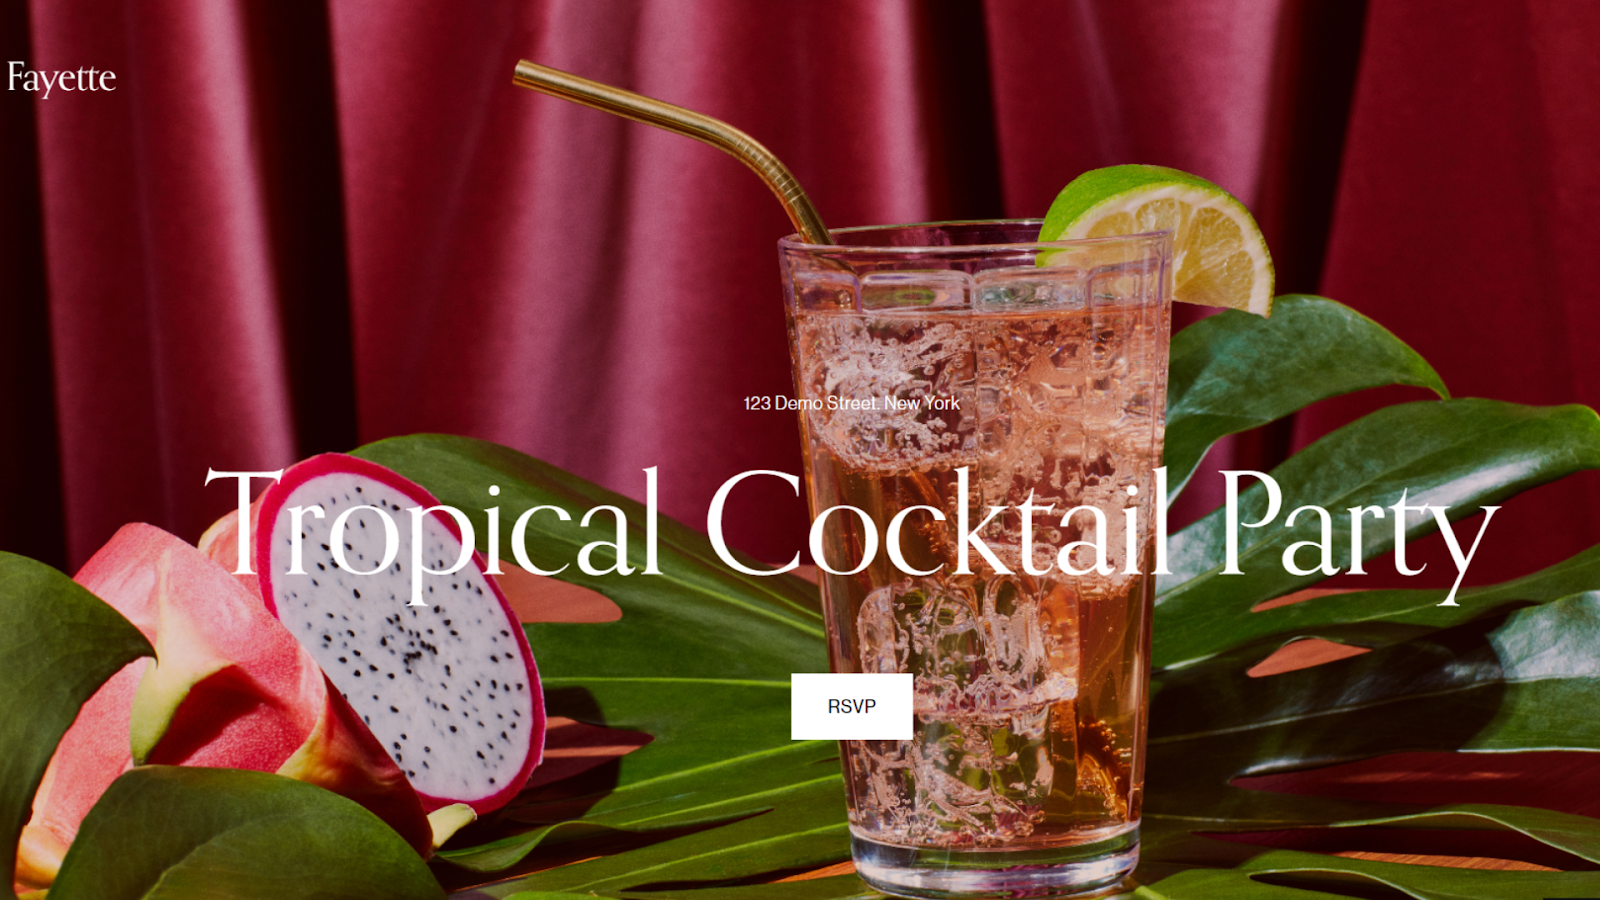 An example of a free Squarespace template for a one-page website for a cocktail party